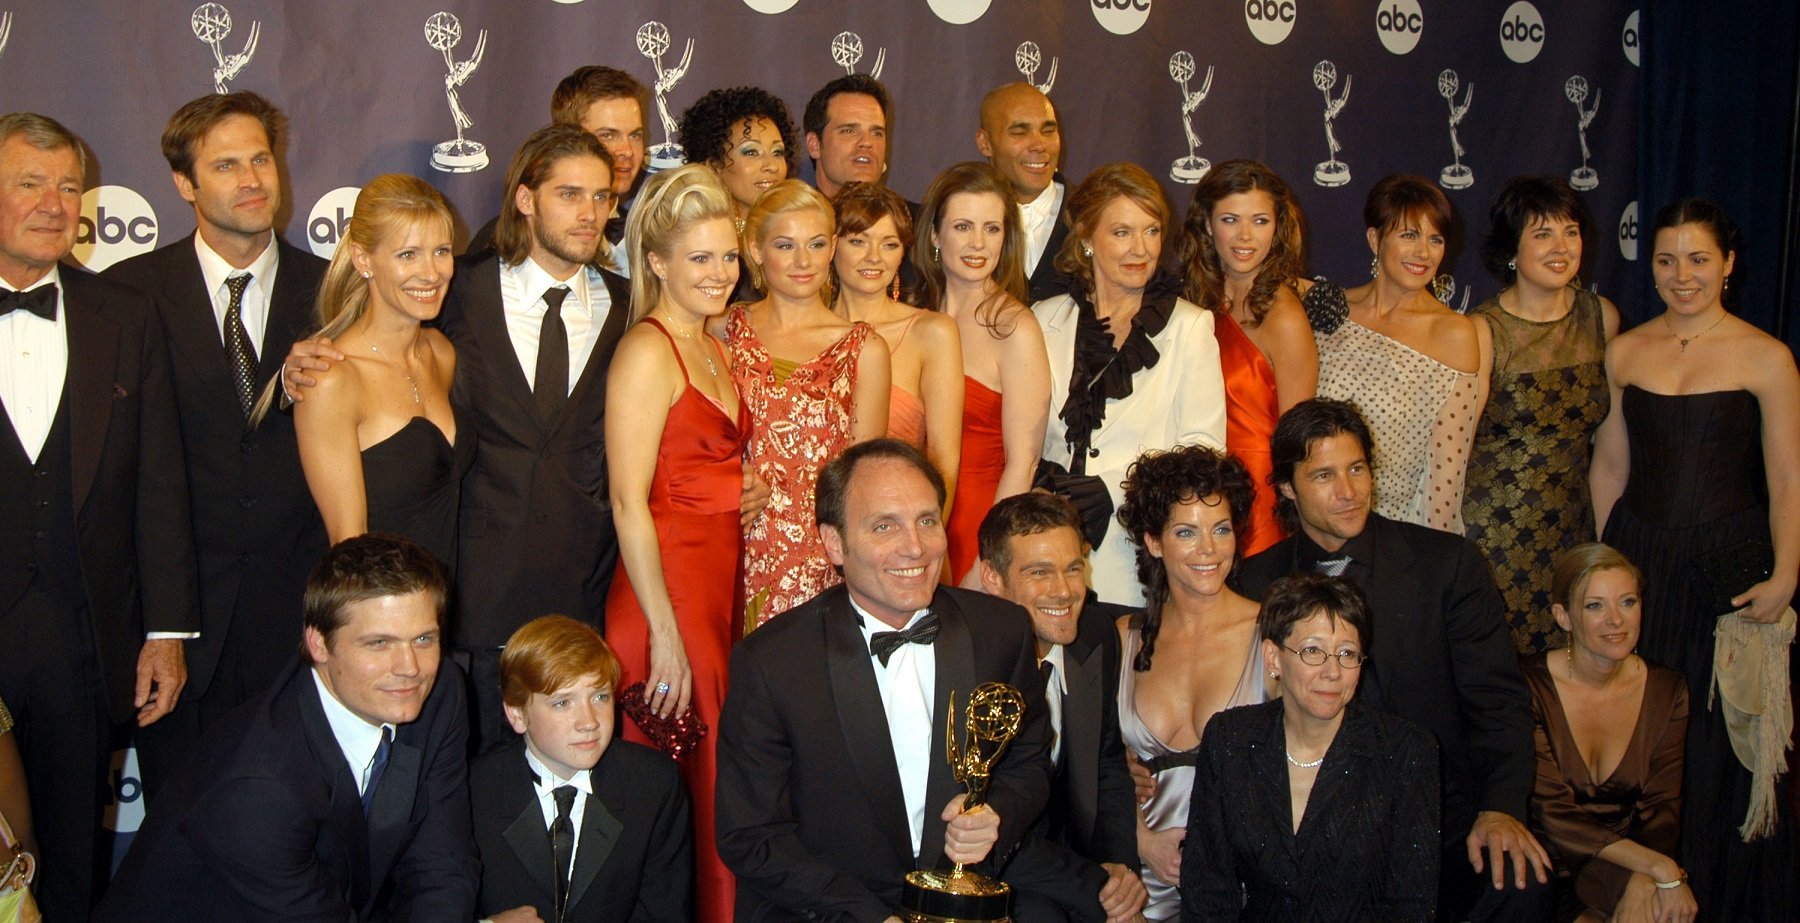 As The World Turns cast at the Emmys